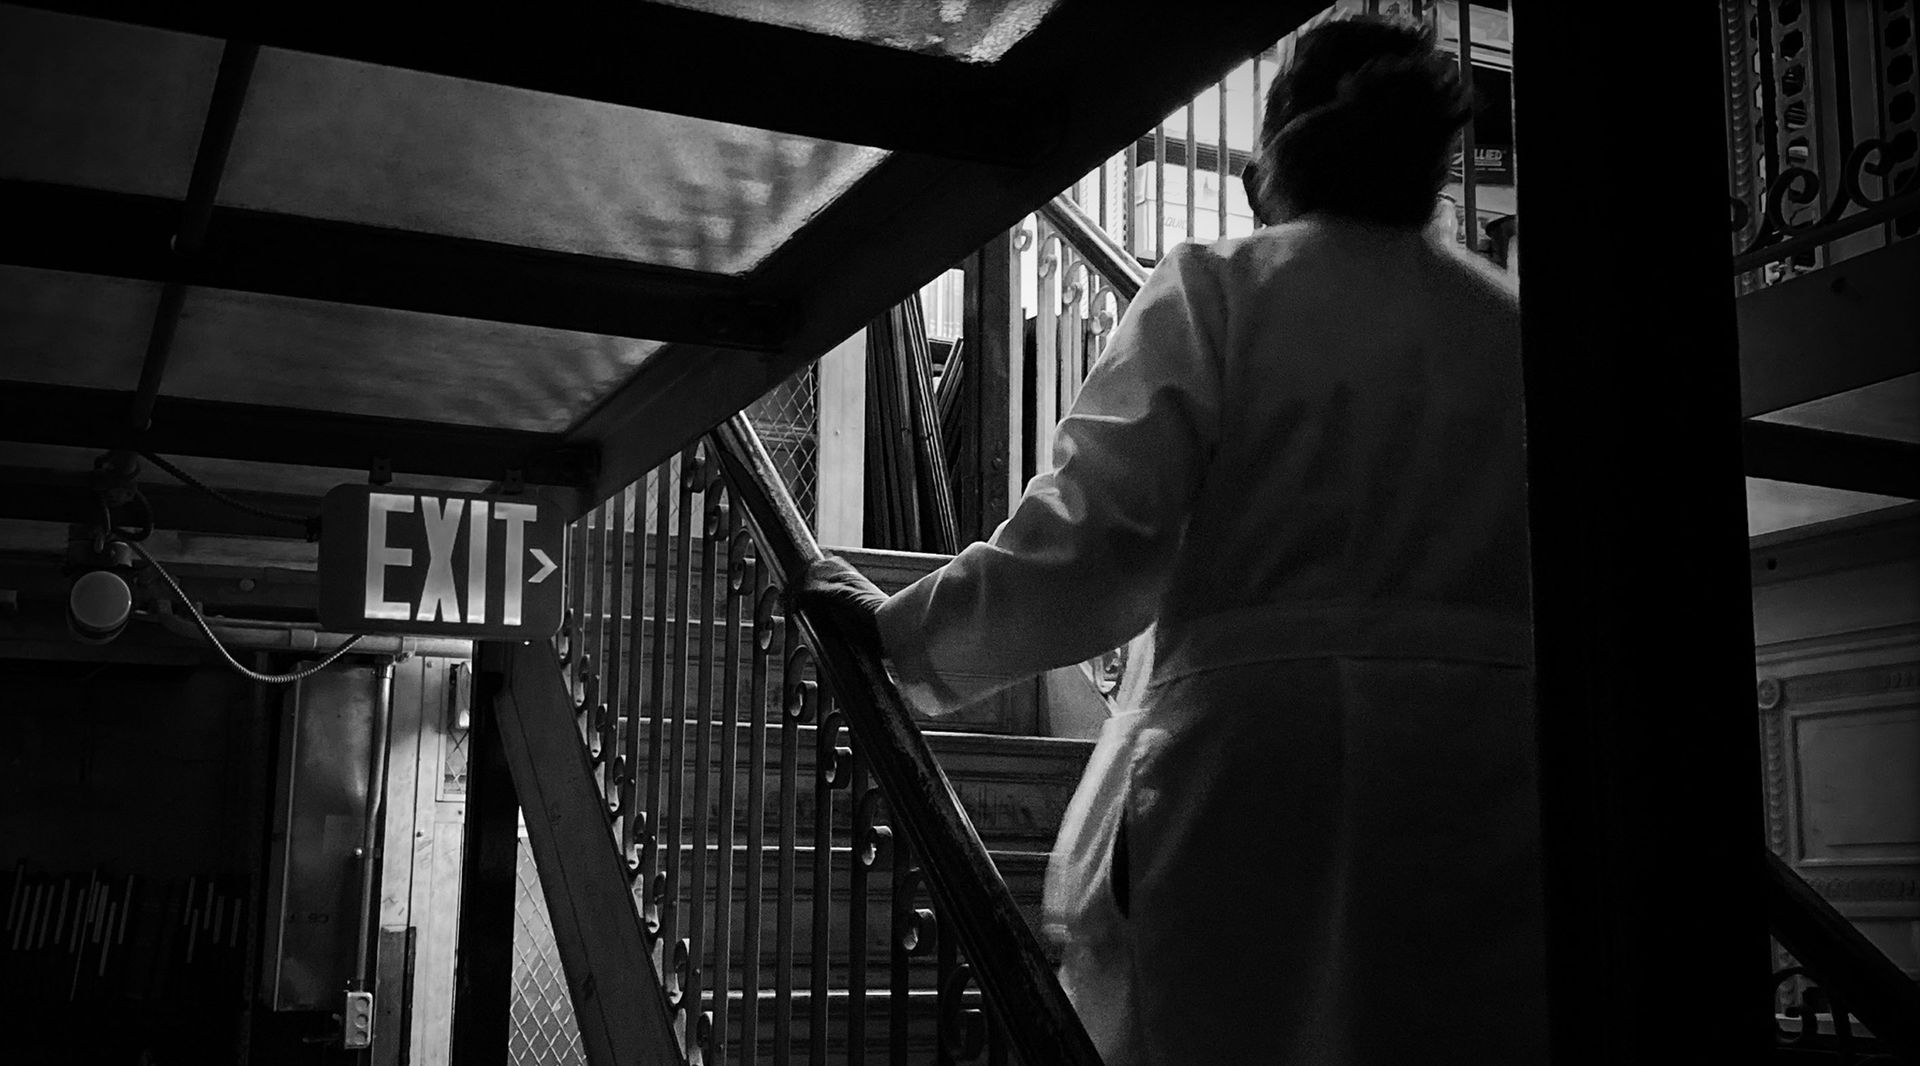 Black and white photograph of a woman in a lab coat ascending an iron staircase in a dimly lit space